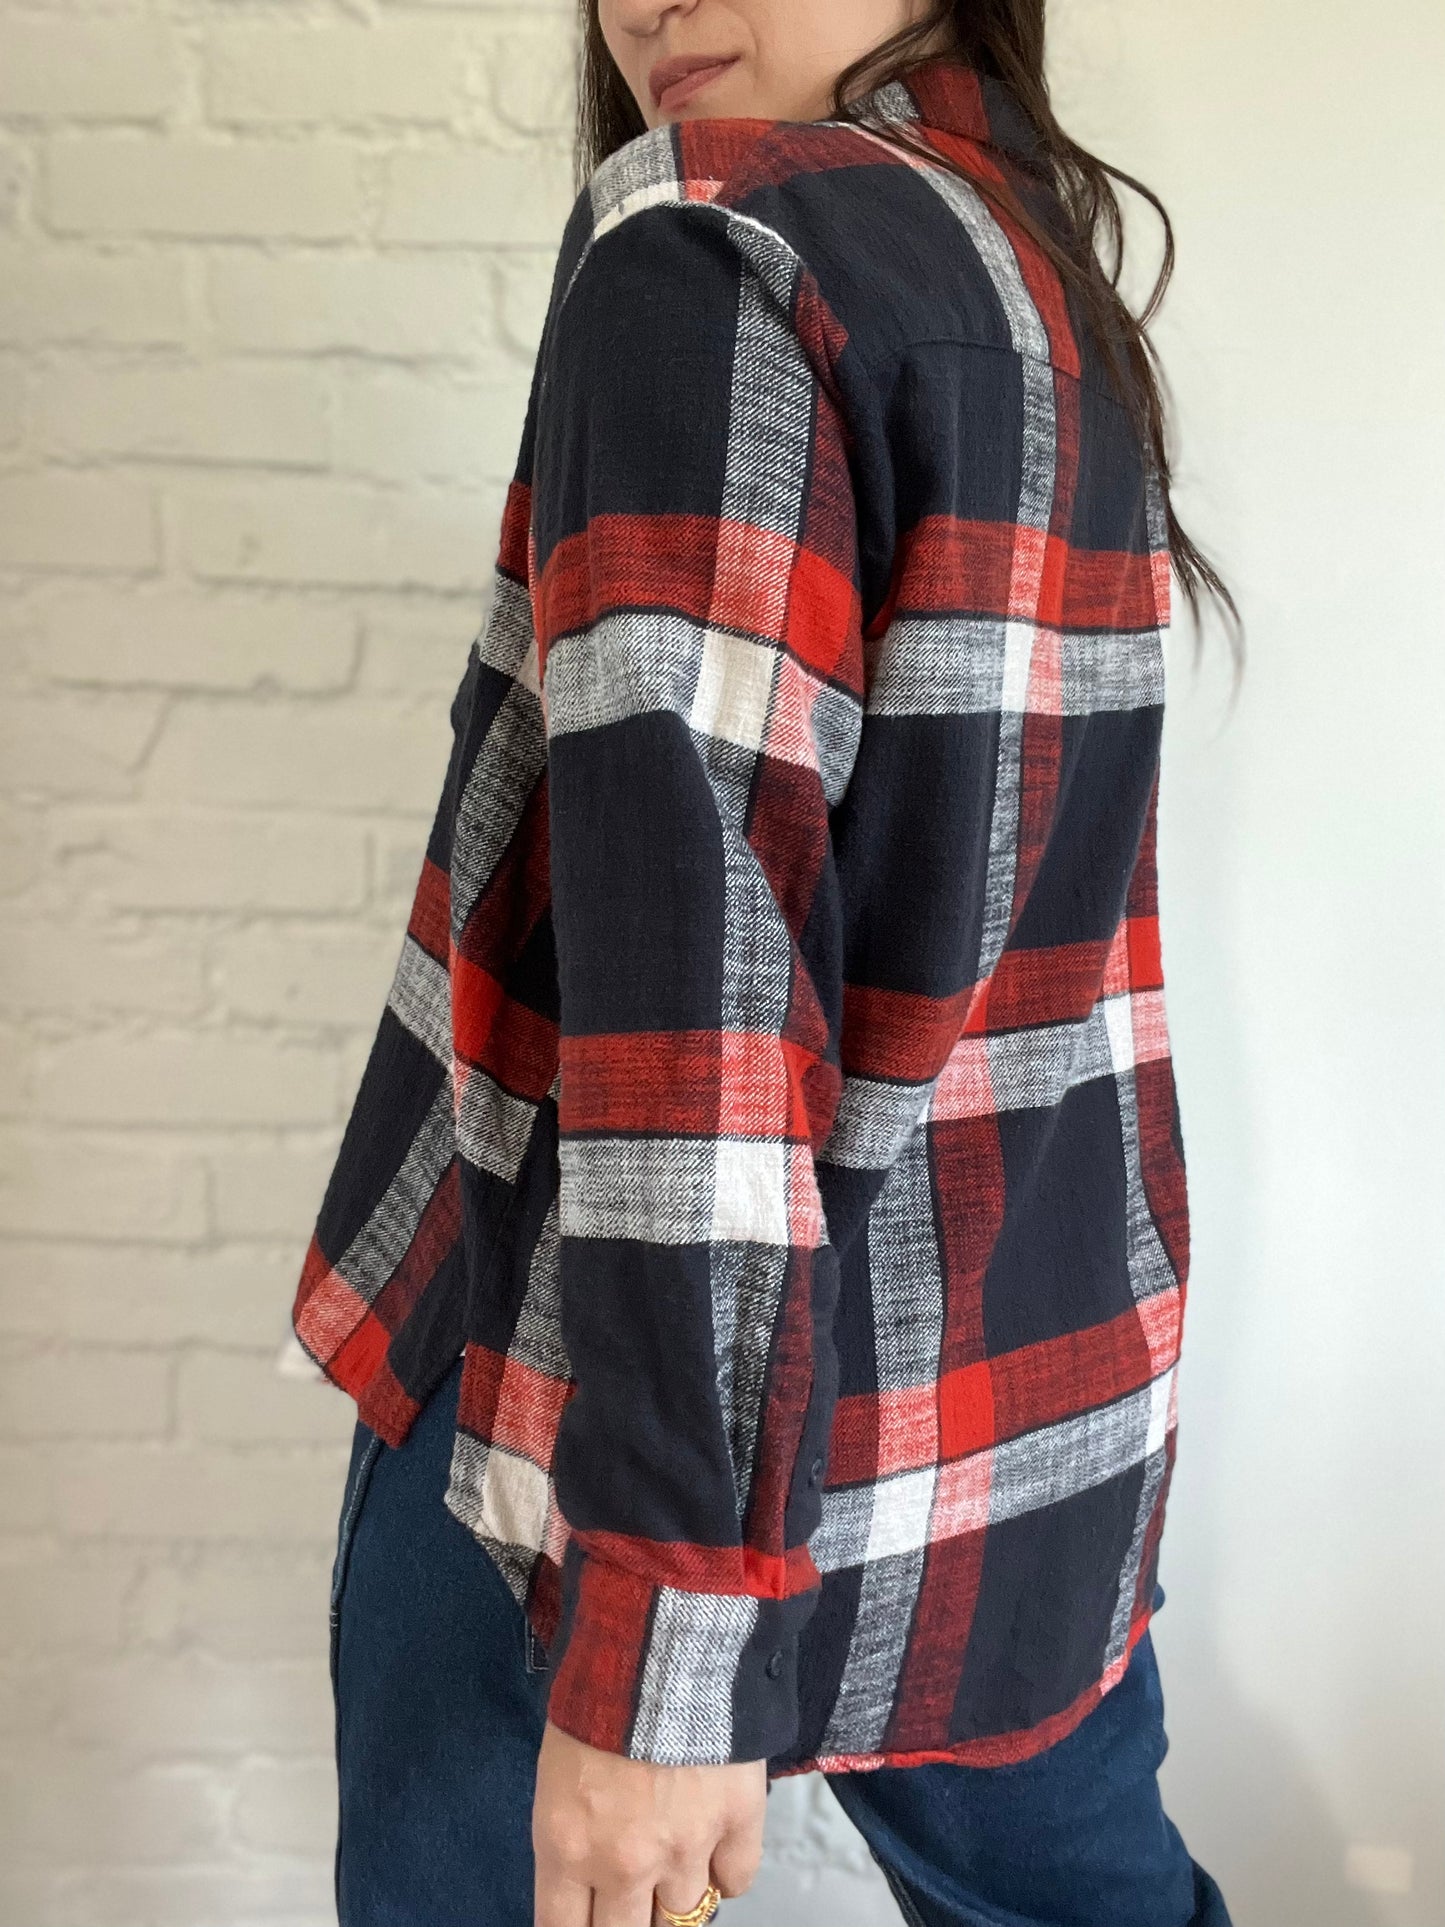 Madewell Plaid Button-Up - Size L